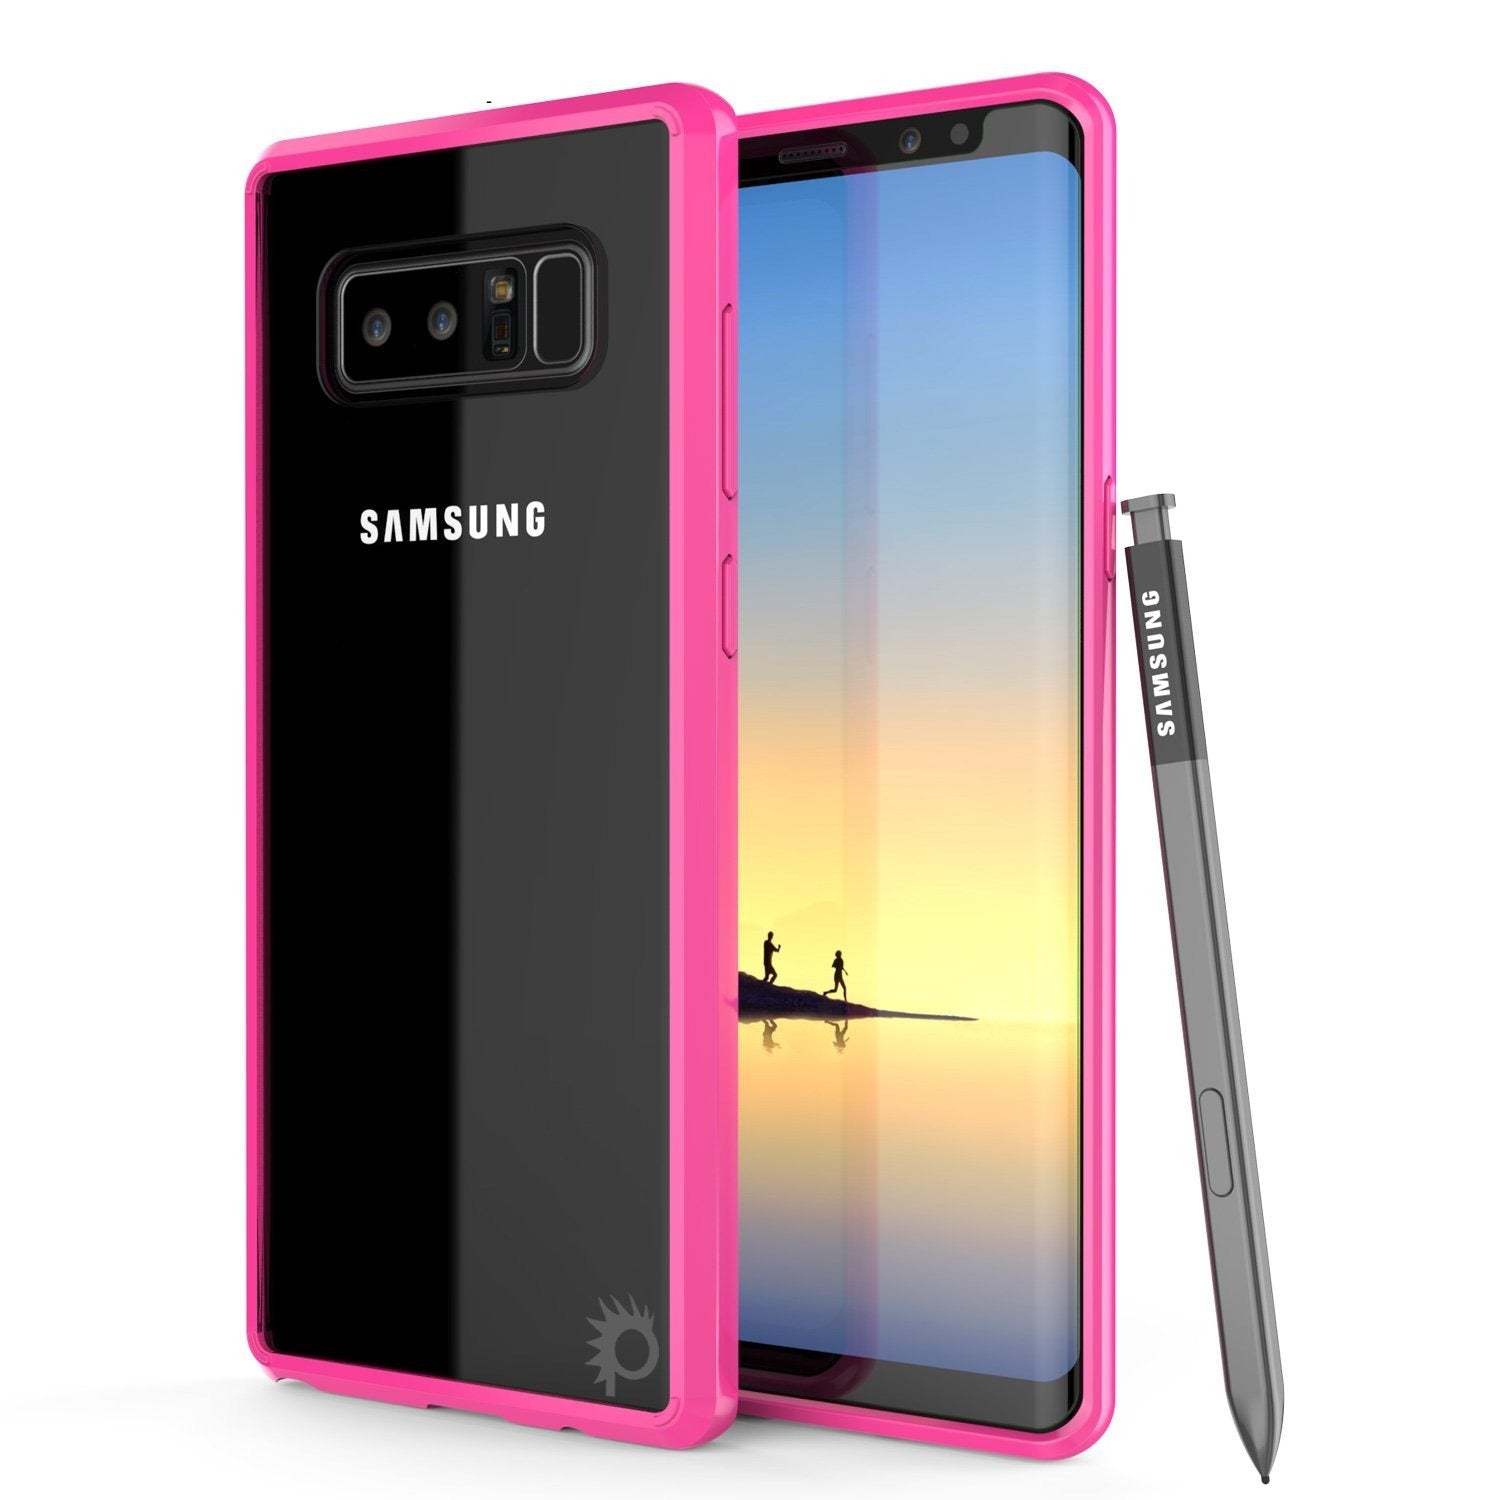 Galaxy Note 8 Case, PUNKcase [LUCID 2.0 Series] [Slim Fit] Armor Cover w/Integrated Anti-Shock System & Screen Protector [Pink] (Color in image: Pink)